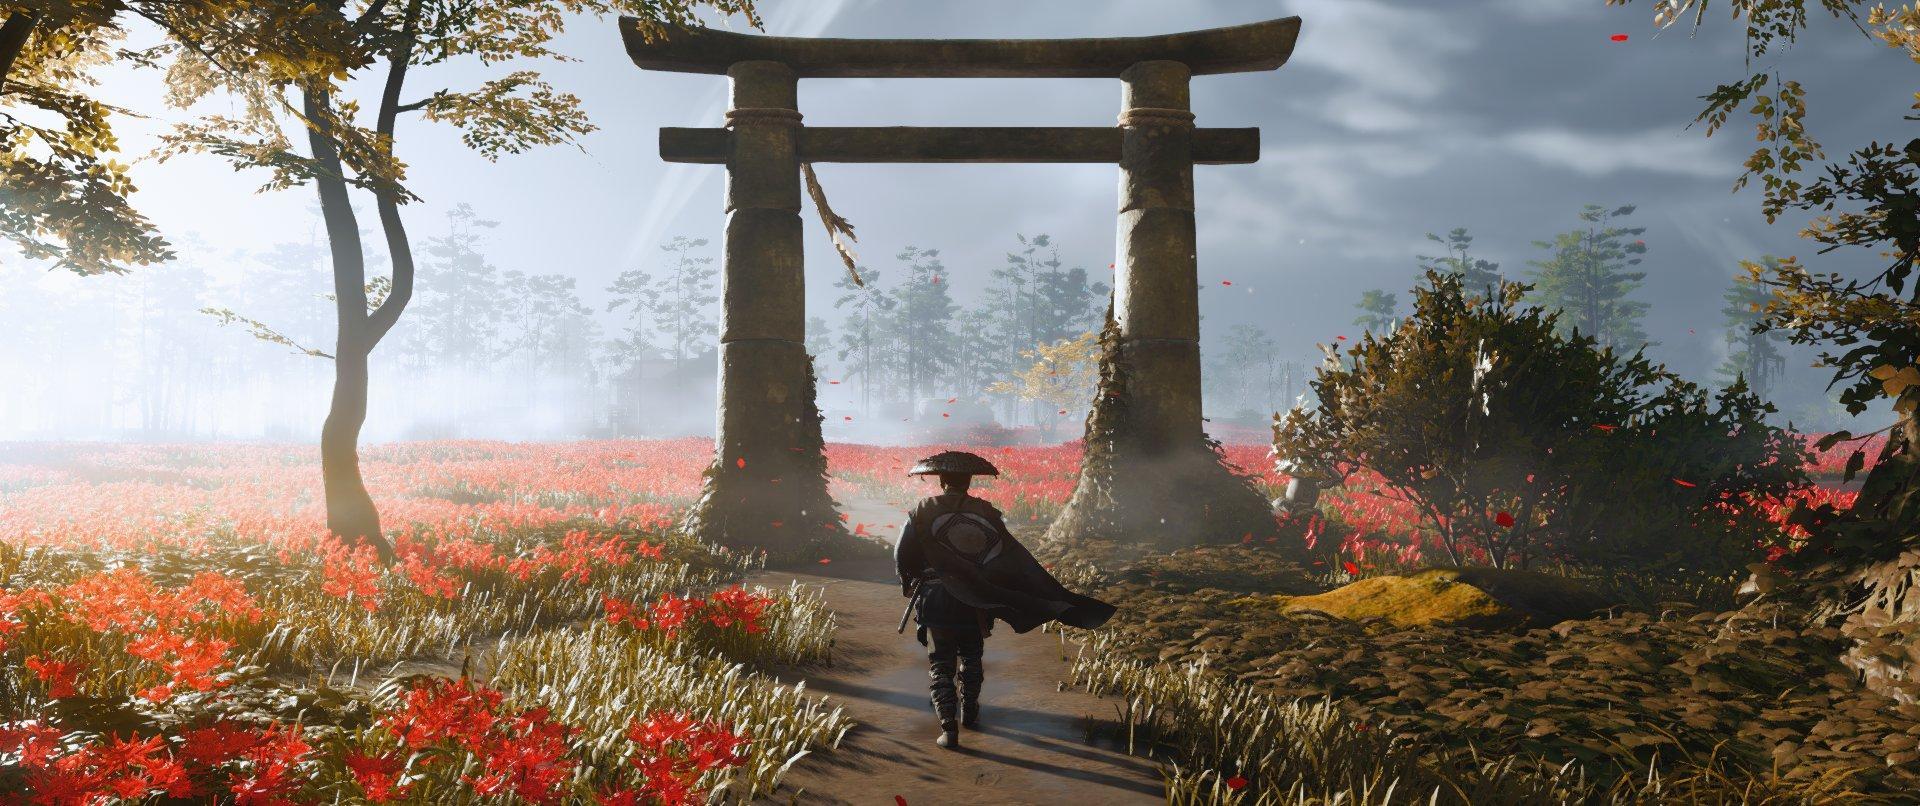 Ghost of Tsushima - Начало пути.